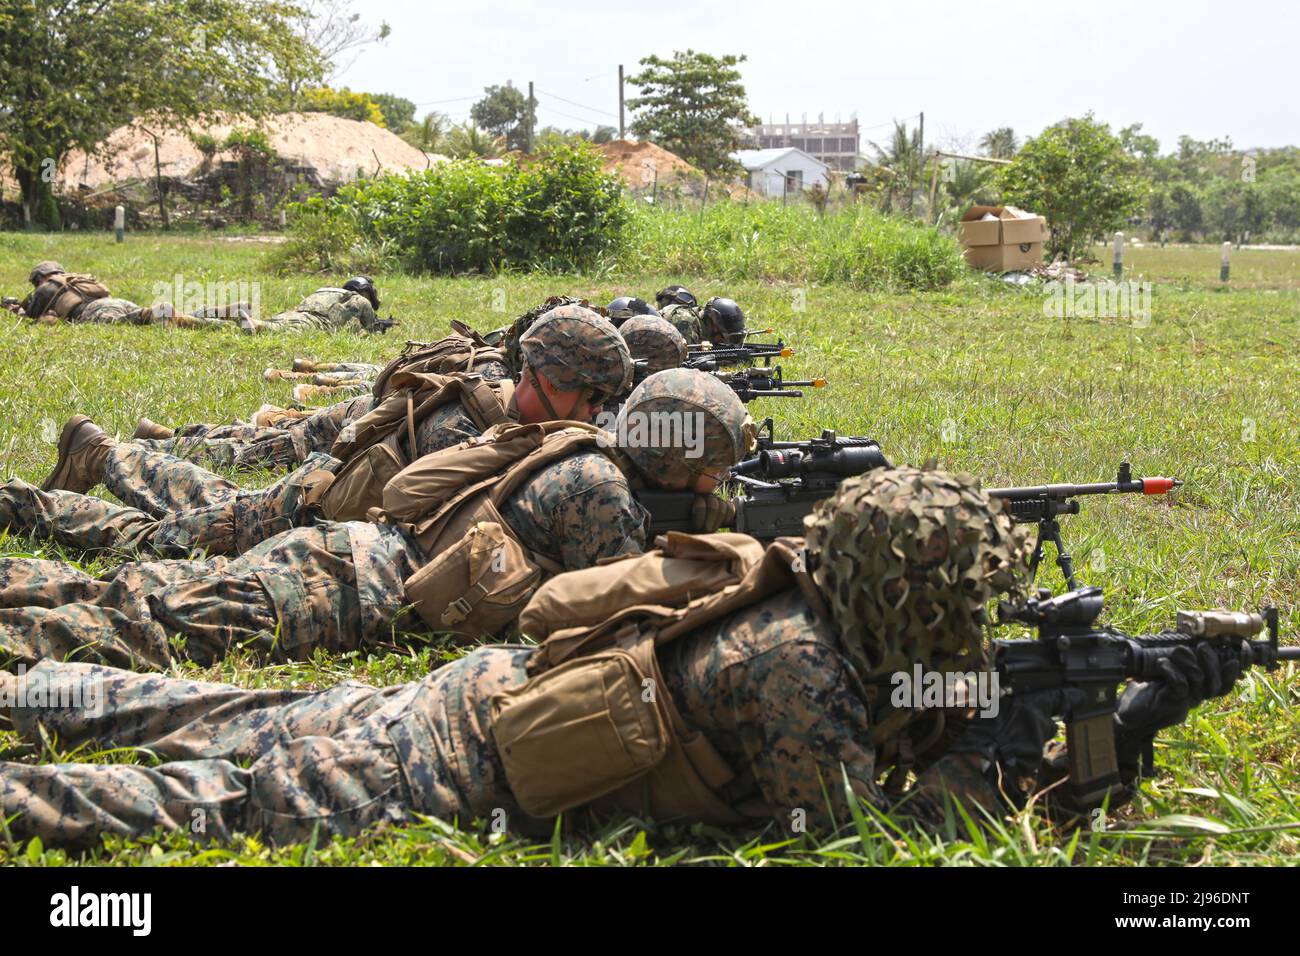 Belize Defense Force, Meixcan Marines, and US Marines conduct culminating exercises including vehicle takedown, search and seizure, arrest, riot control, and building raids May 19, 2022 at Belize Police Training Academy for Tradewinds 2022. Tradewinds 2022 is a multinational exercise designed to expand the Caribbean region’s capability to mitigate, plan for, and respond to crises; increase regional training capacity and interoperability; develop new and refine existing standard operating procedures (SOPs); enhance ability to defend exclusive economic zones (EEZ); and promote human rights and a Stock Photo